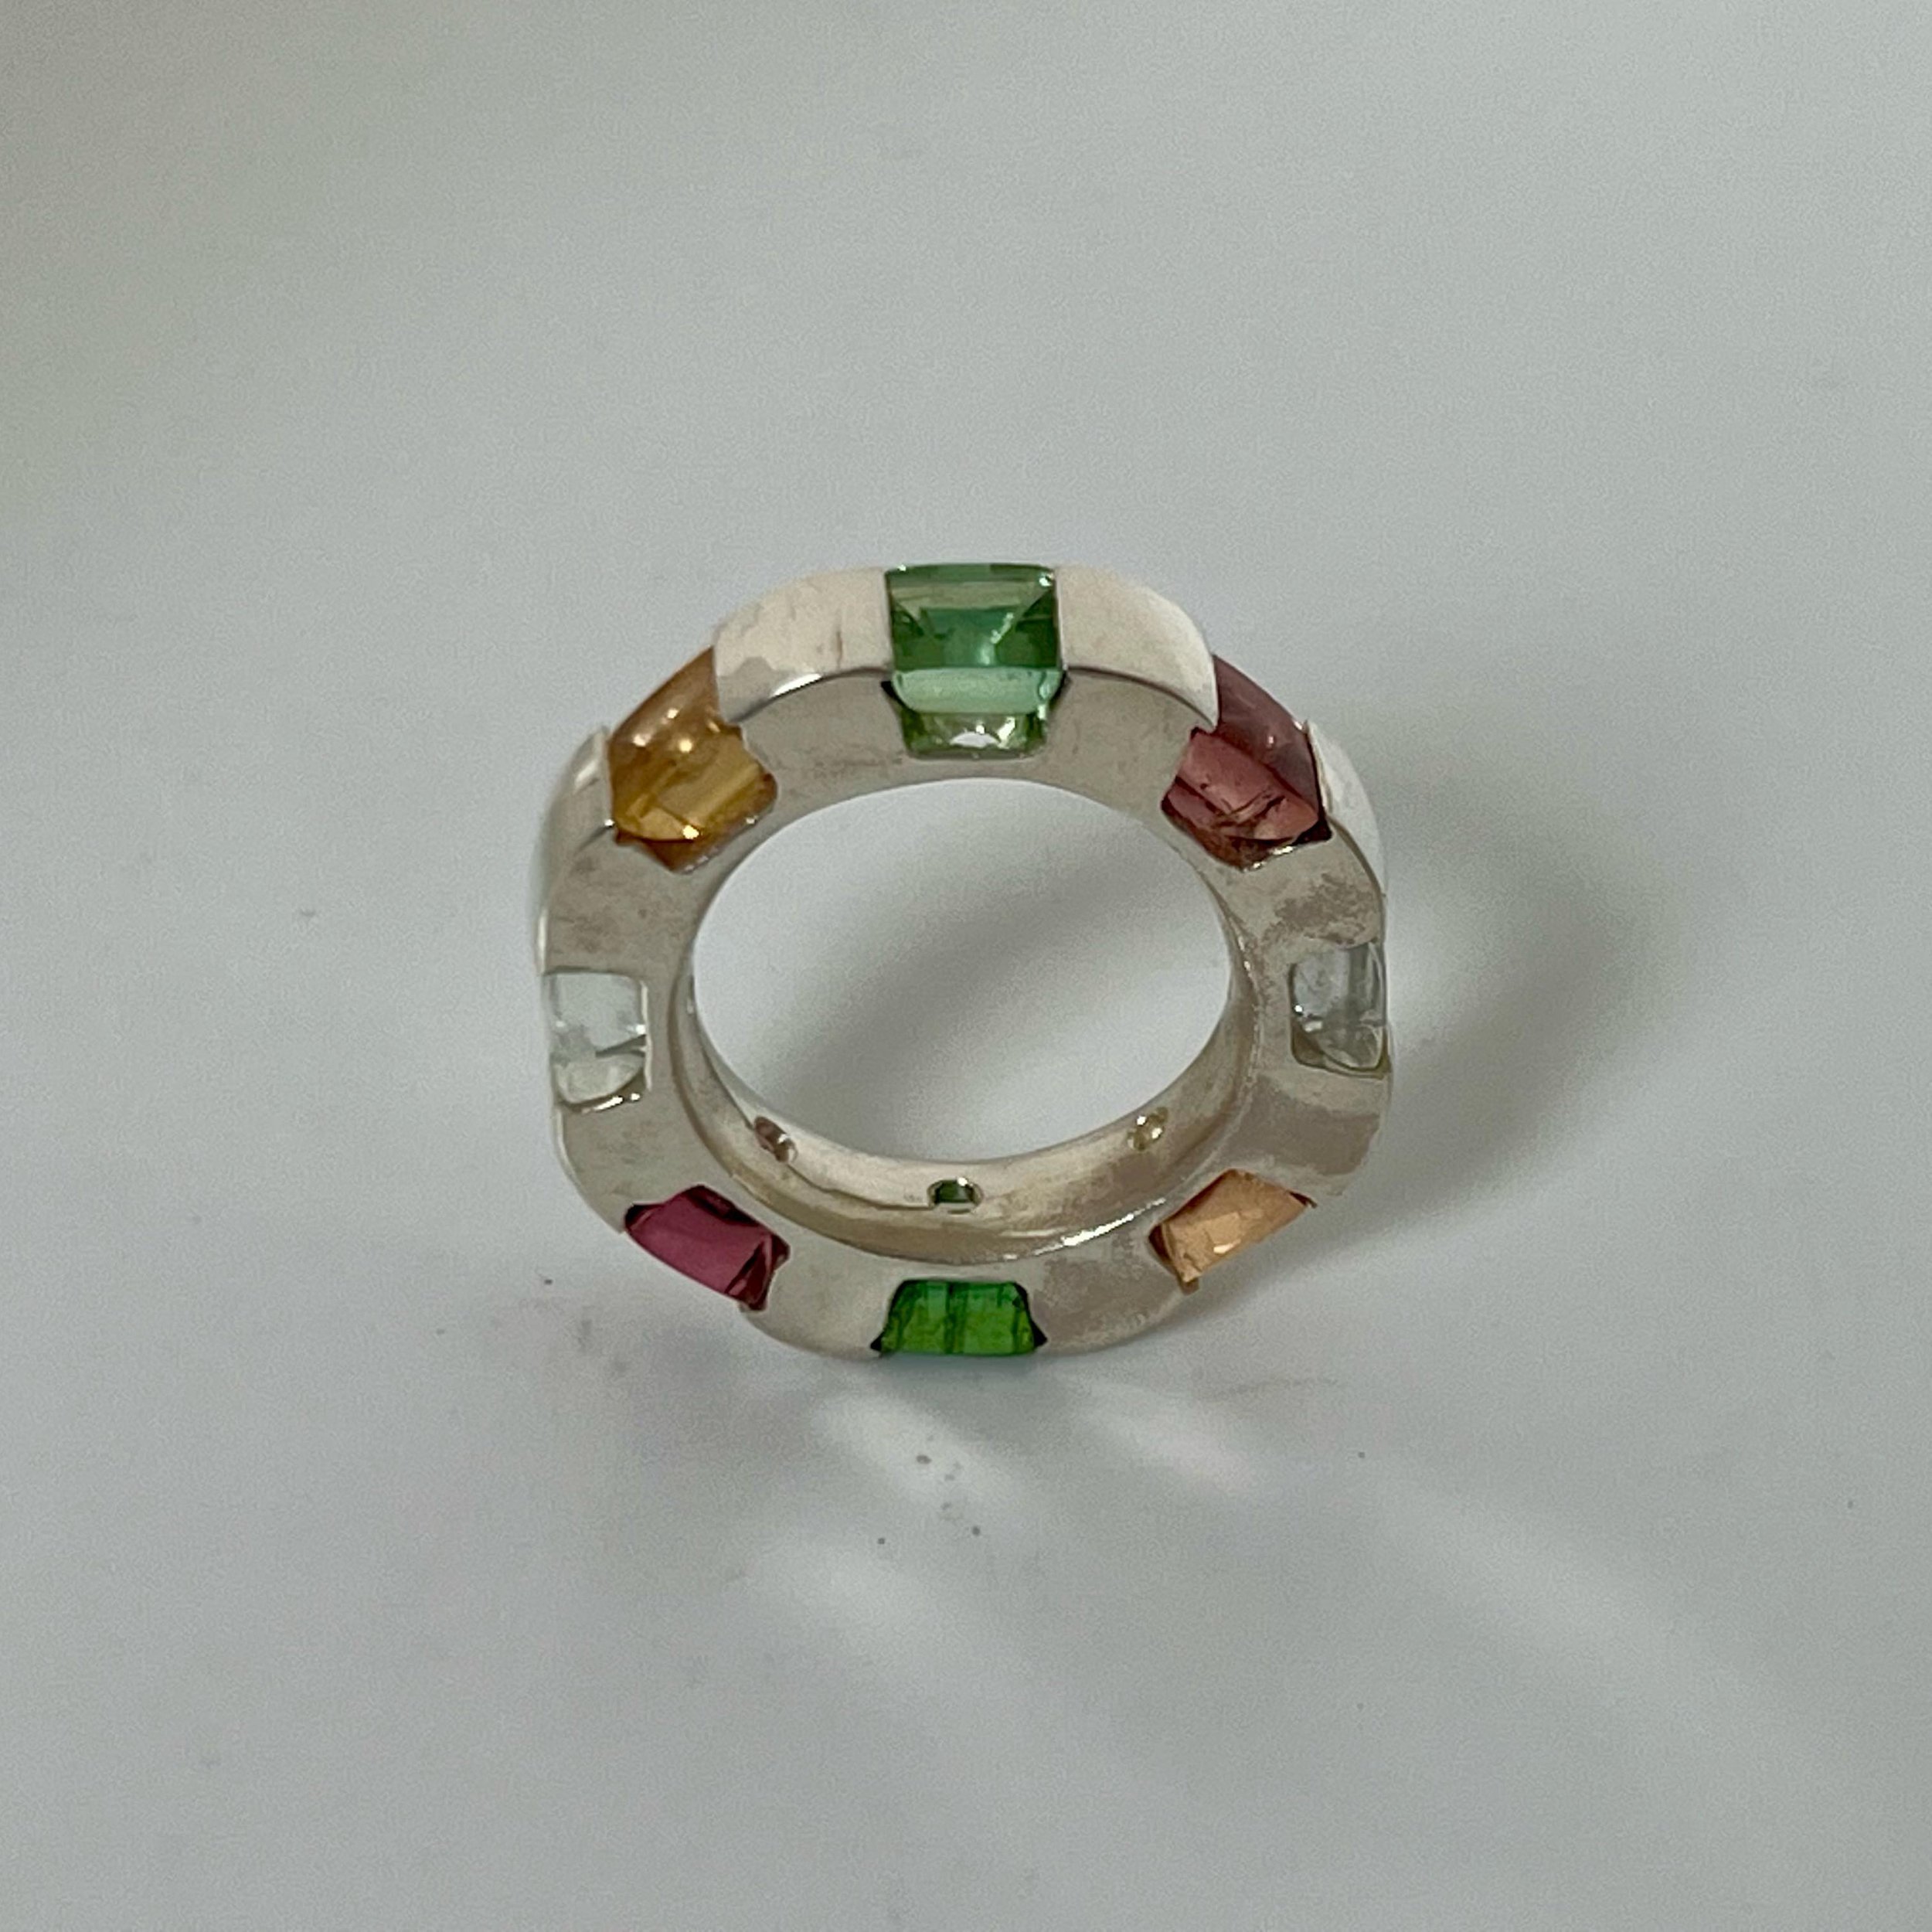 Super happy with this newly completed statement ring! 

Checker Ring in rainbow colors available by order in sterling silver or 18k gold
Follow and DM☝🏼here! 

More @suzetteoneofakindjewelry 
-
-
-
#statementring #ring #stackingring #bandring #rainb